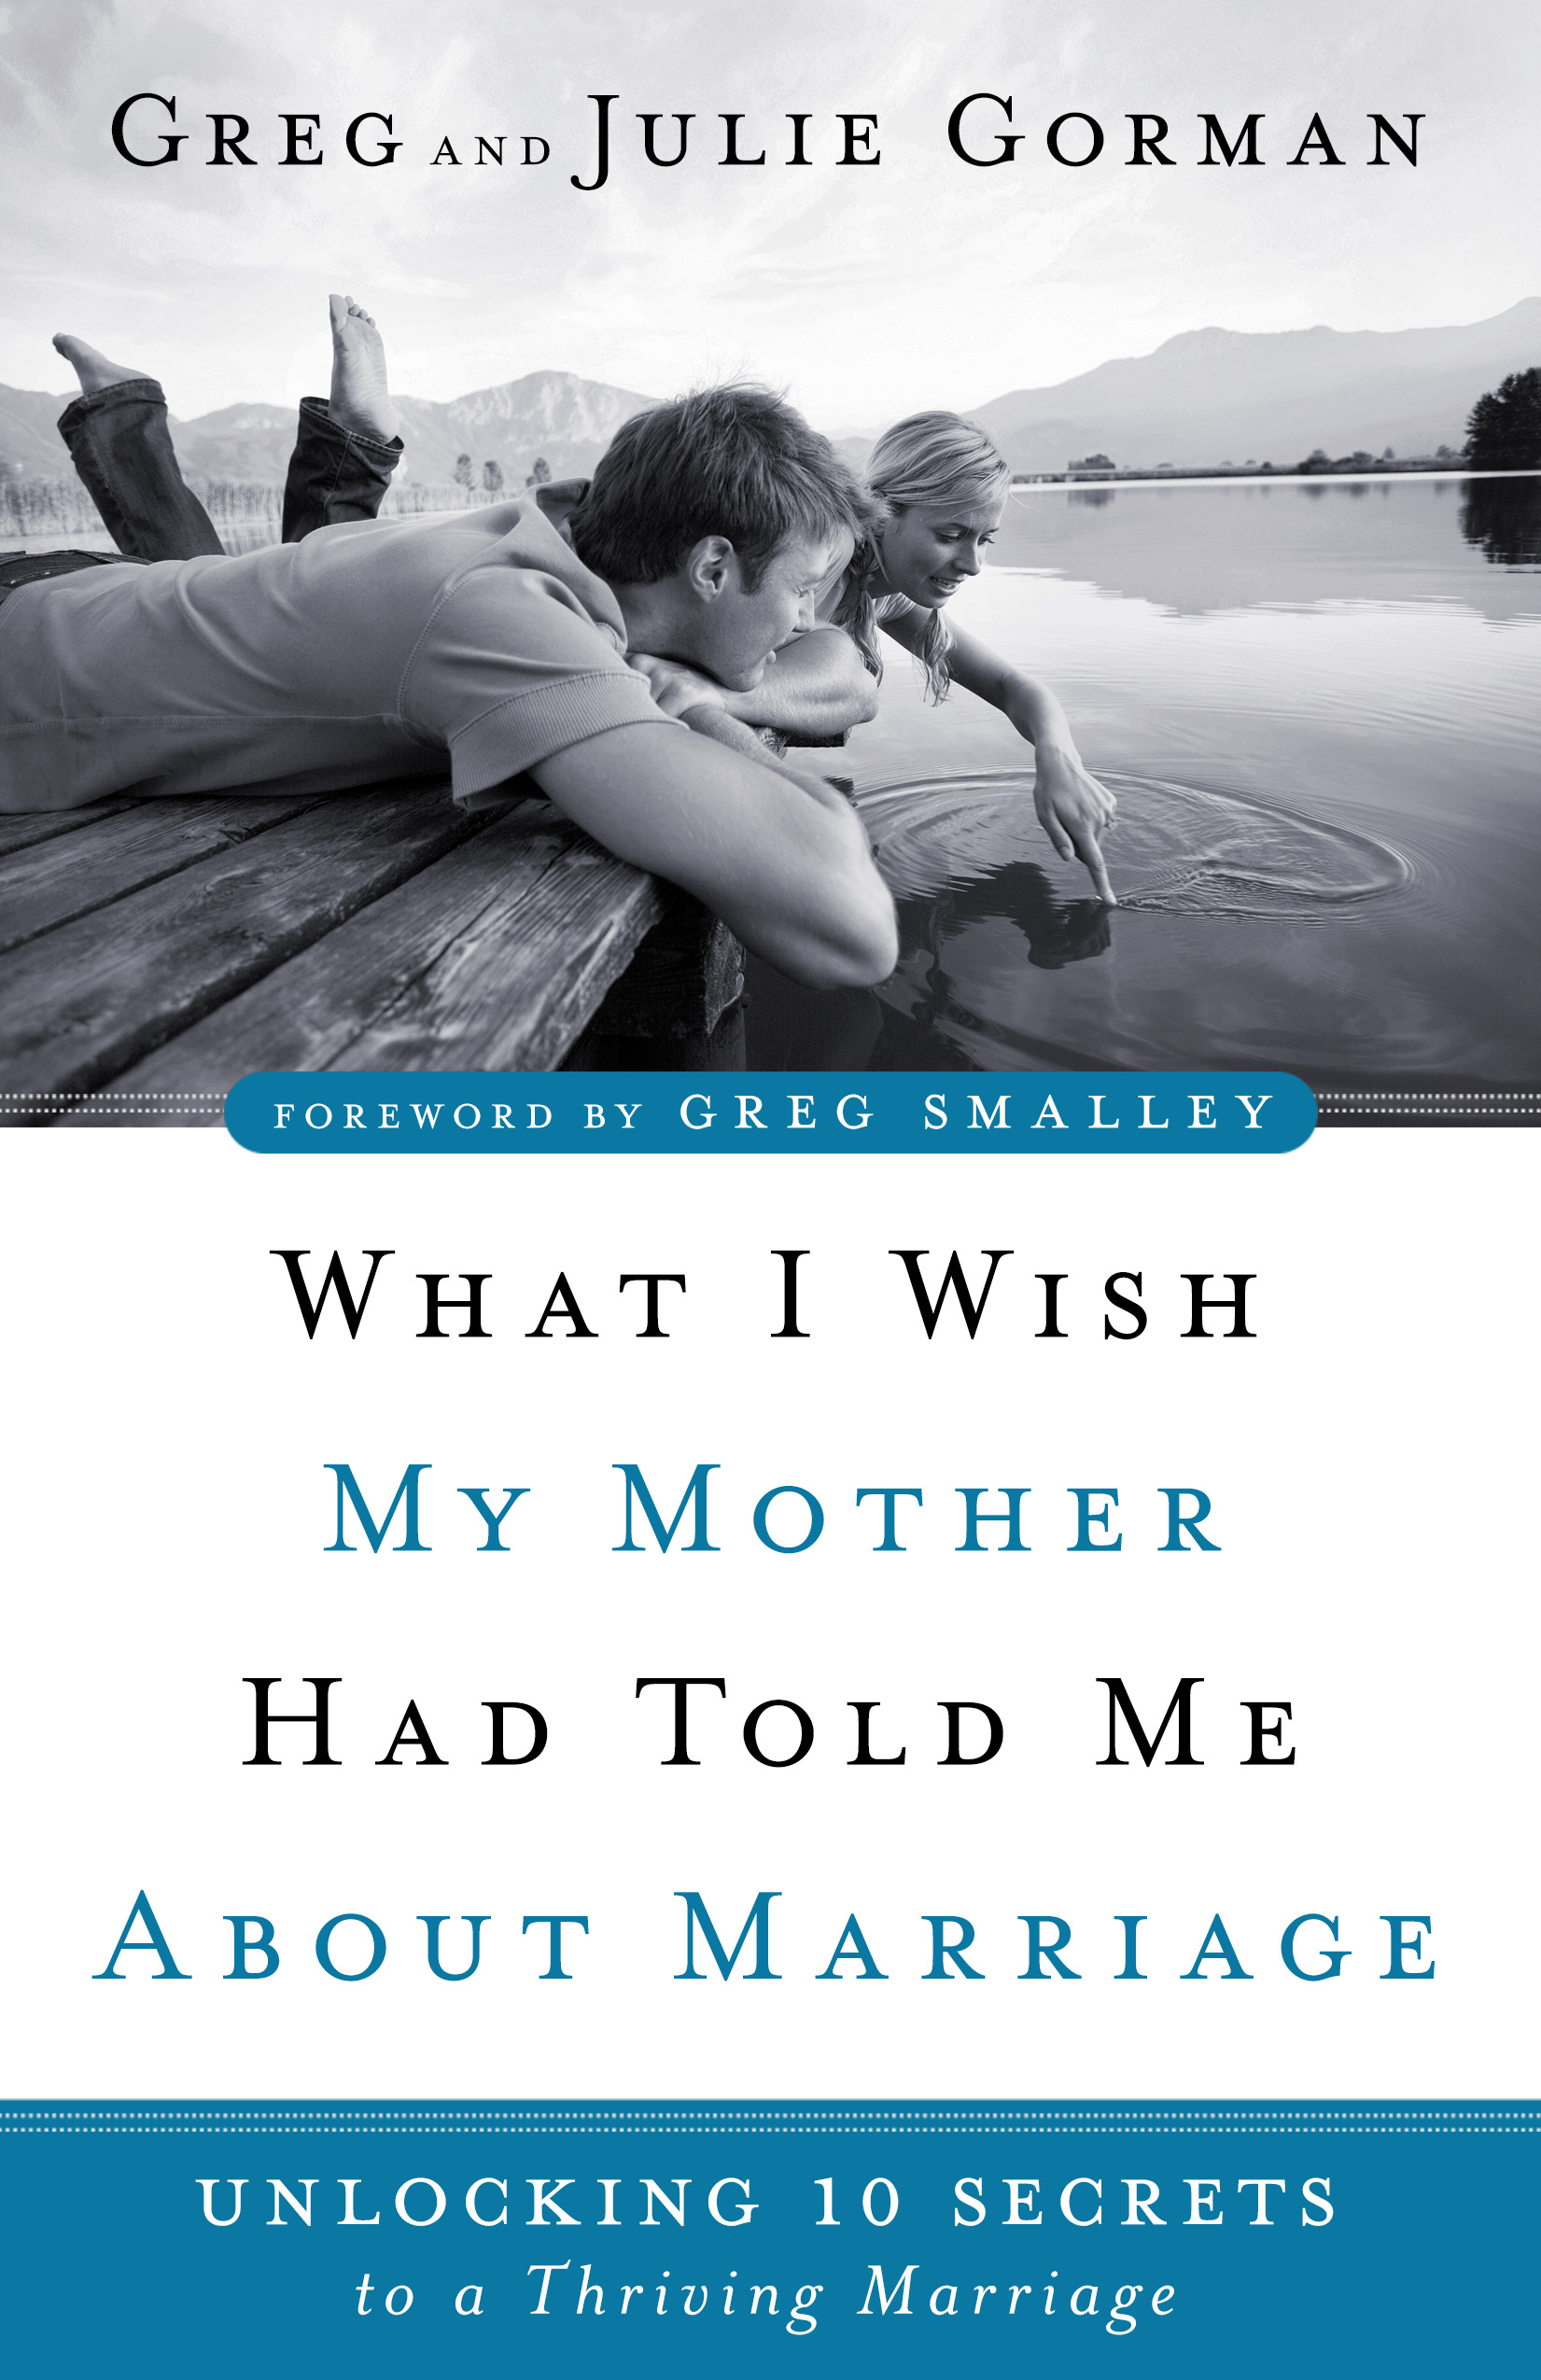 WhatWishMARRIAGE_front